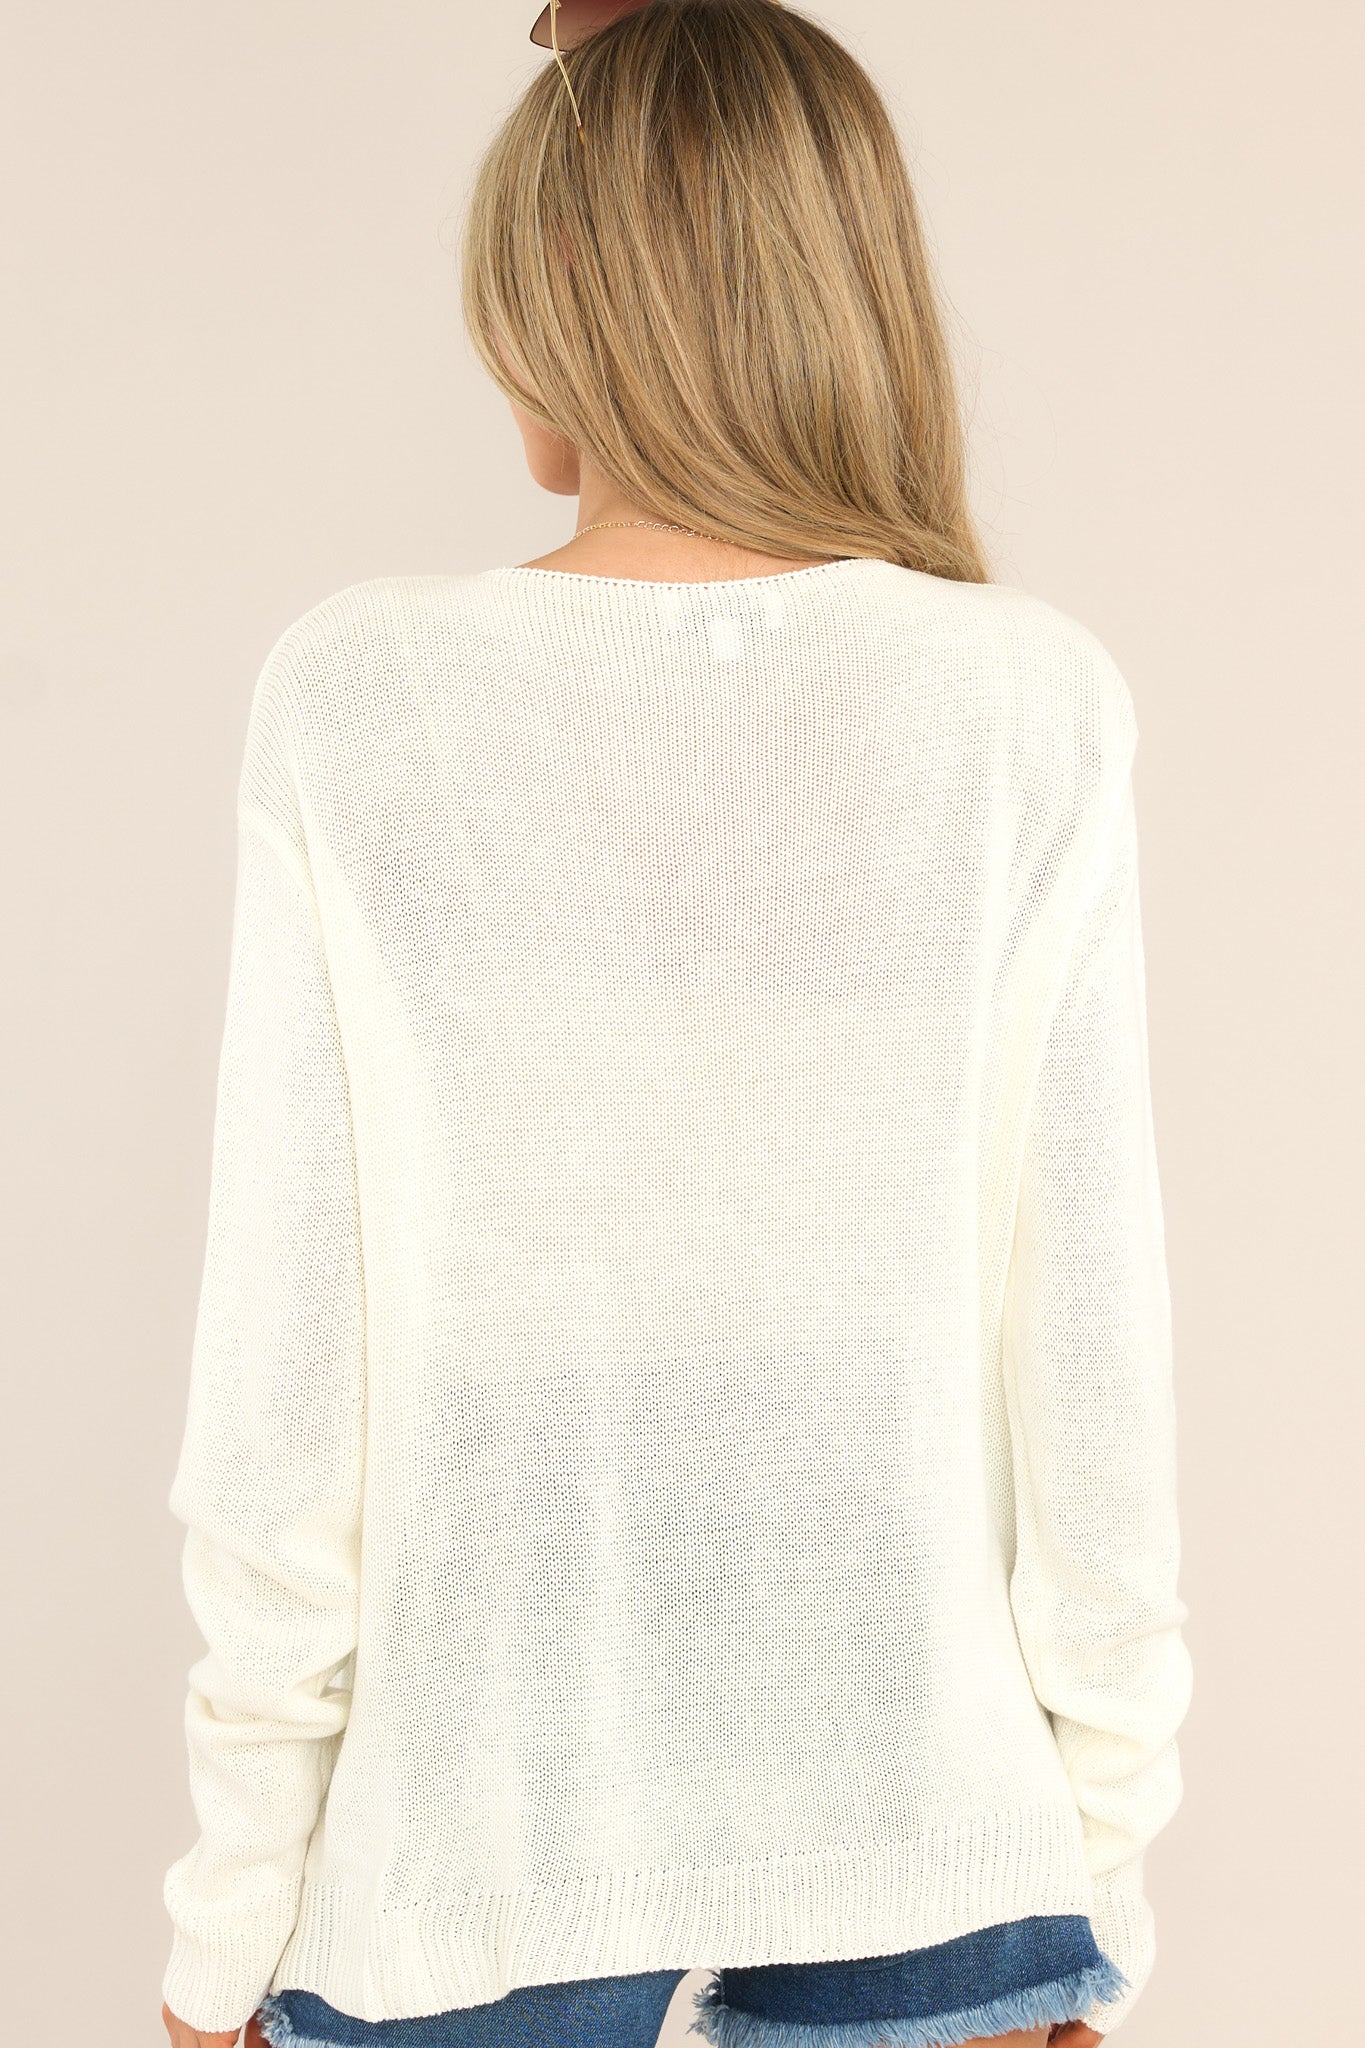 Back view of this top that features 